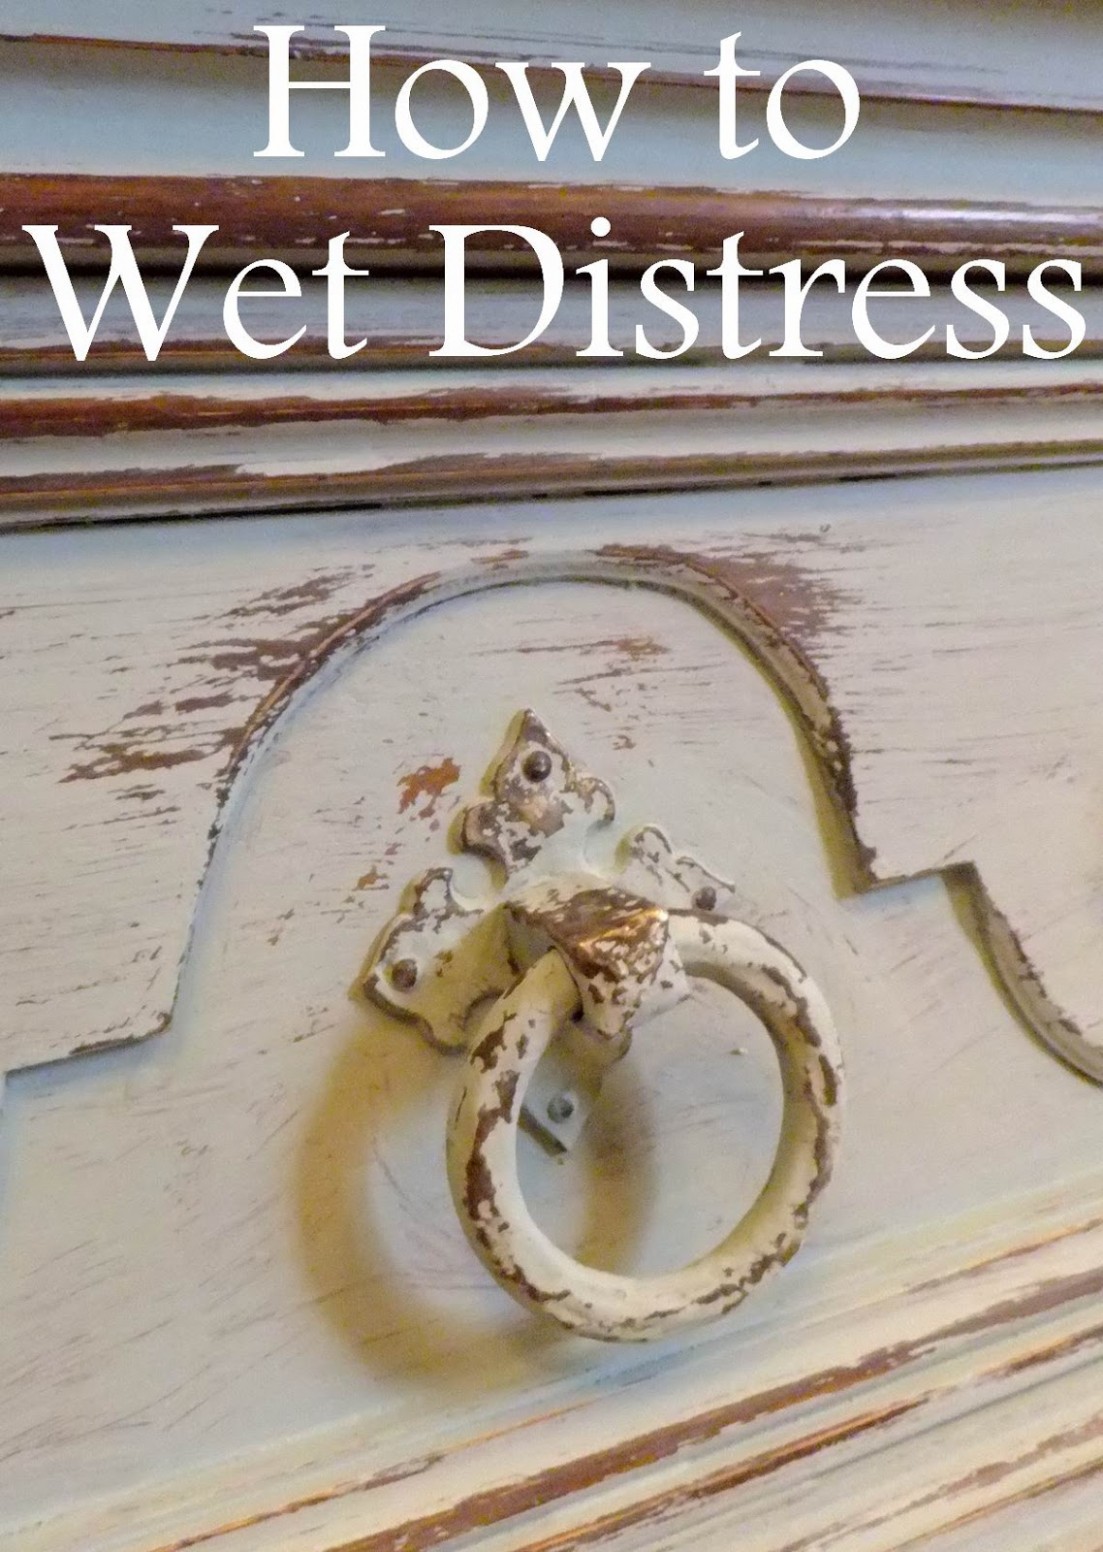 6 The Love Of Wood: How To Wet Distress Distressing Annie Sloan ..